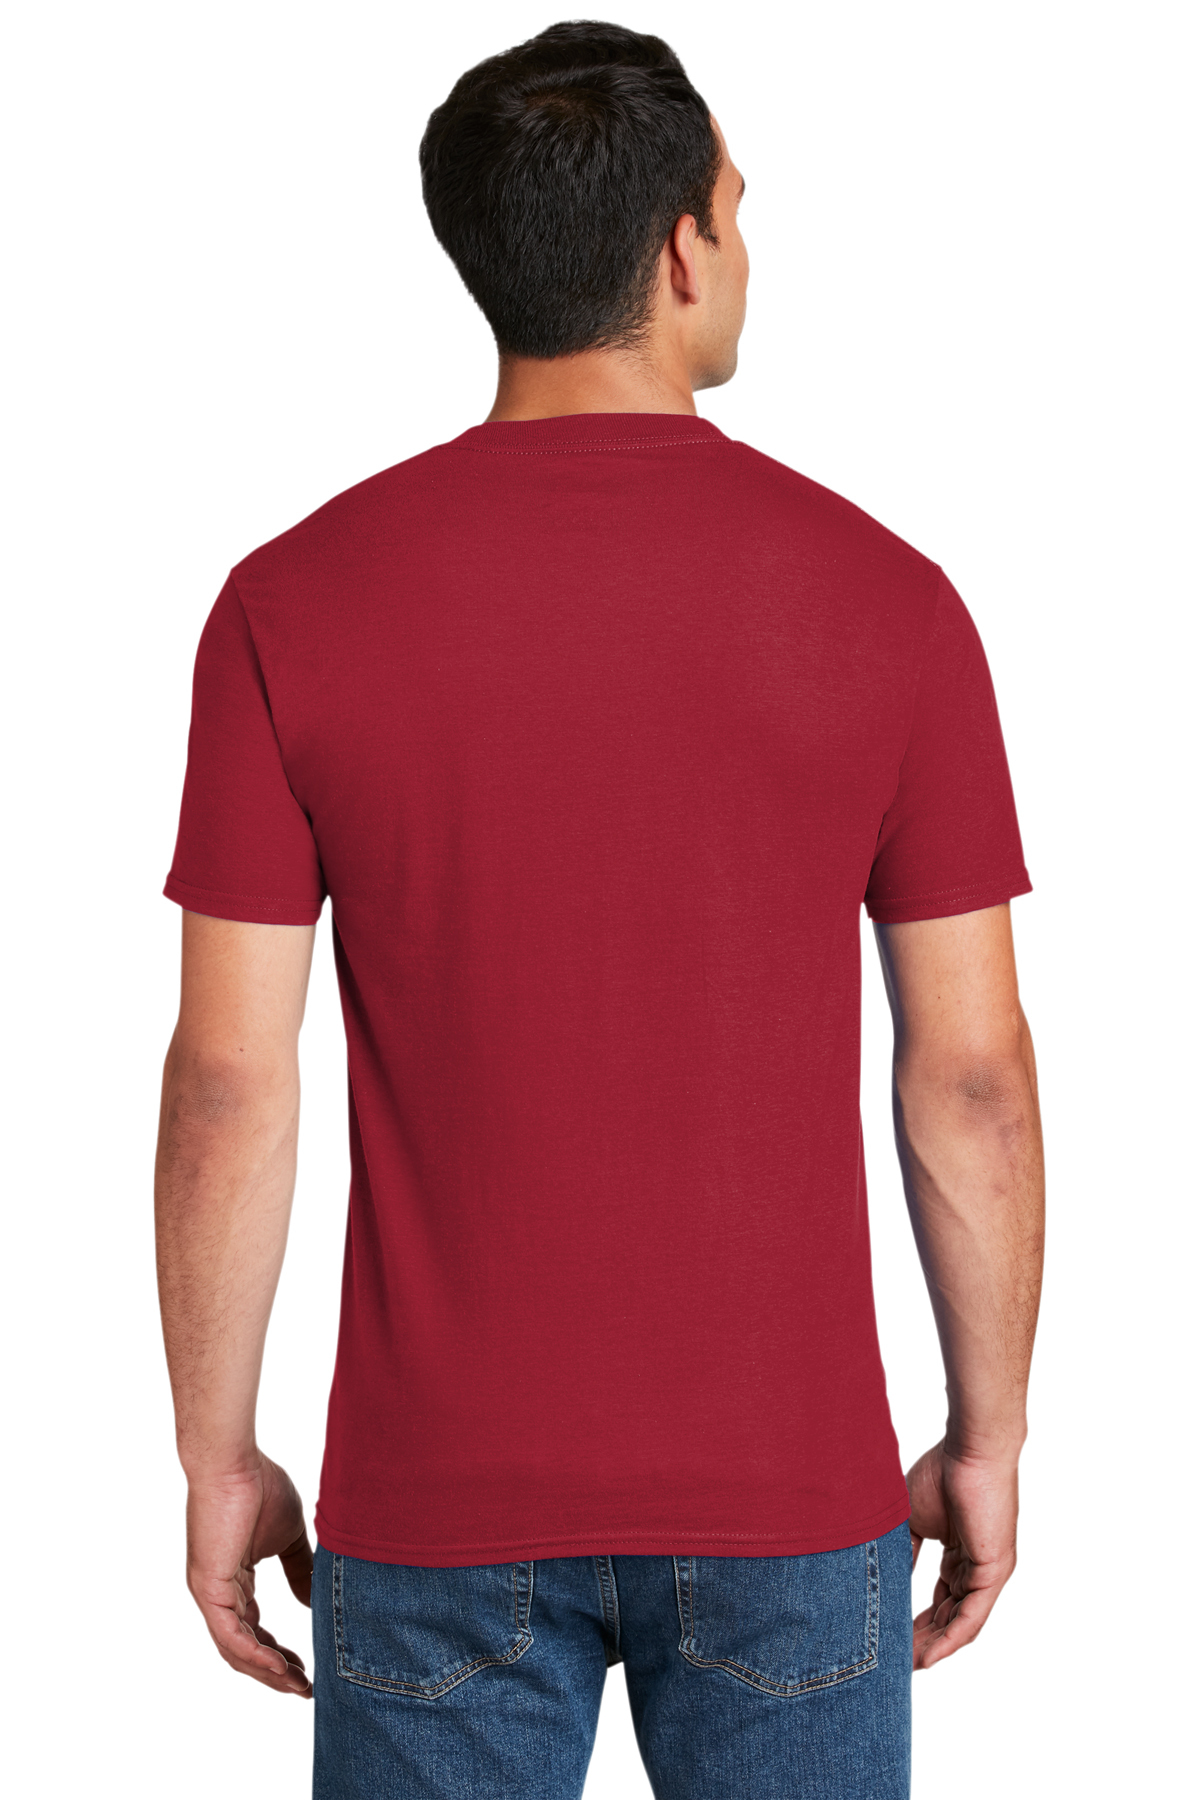 Hanes 61 Oz BEEFY-T With Pocket Deep Red Style # 5190P - Original Label 3XL -